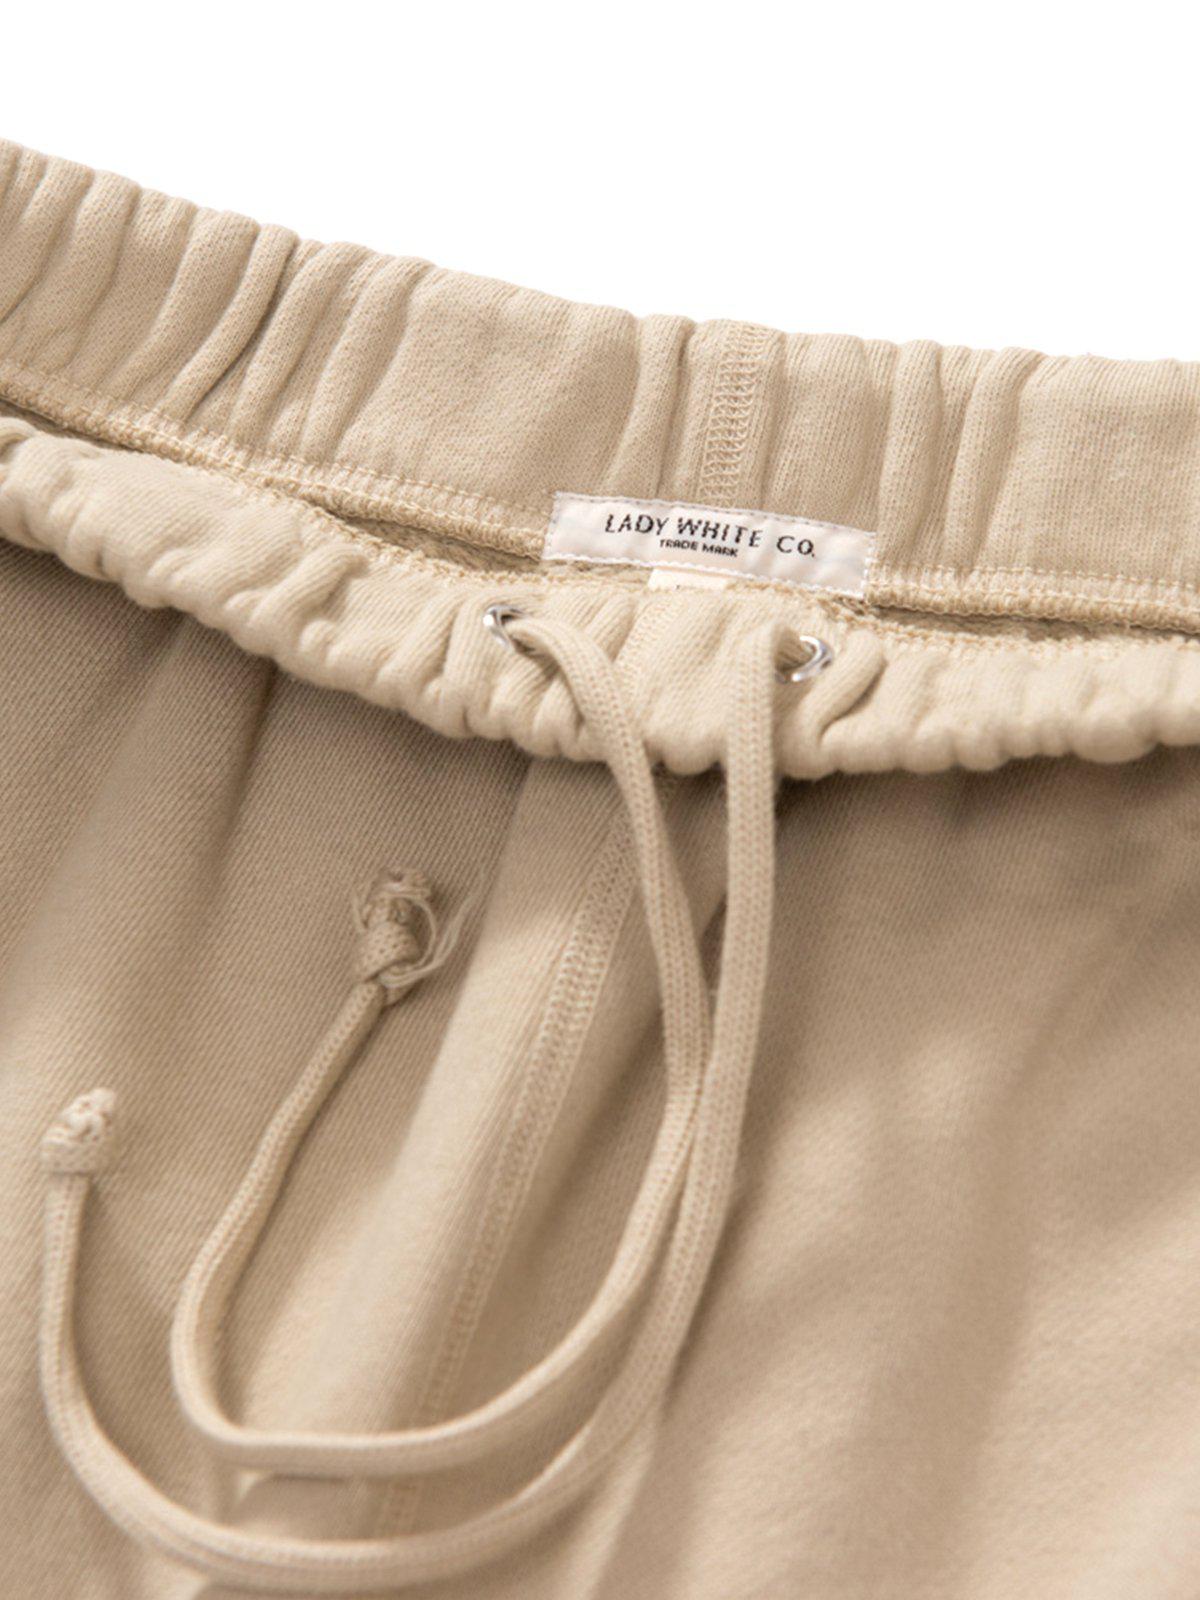 Lady White Co. Sweatpant Beige - MORE by Morello Indonesia